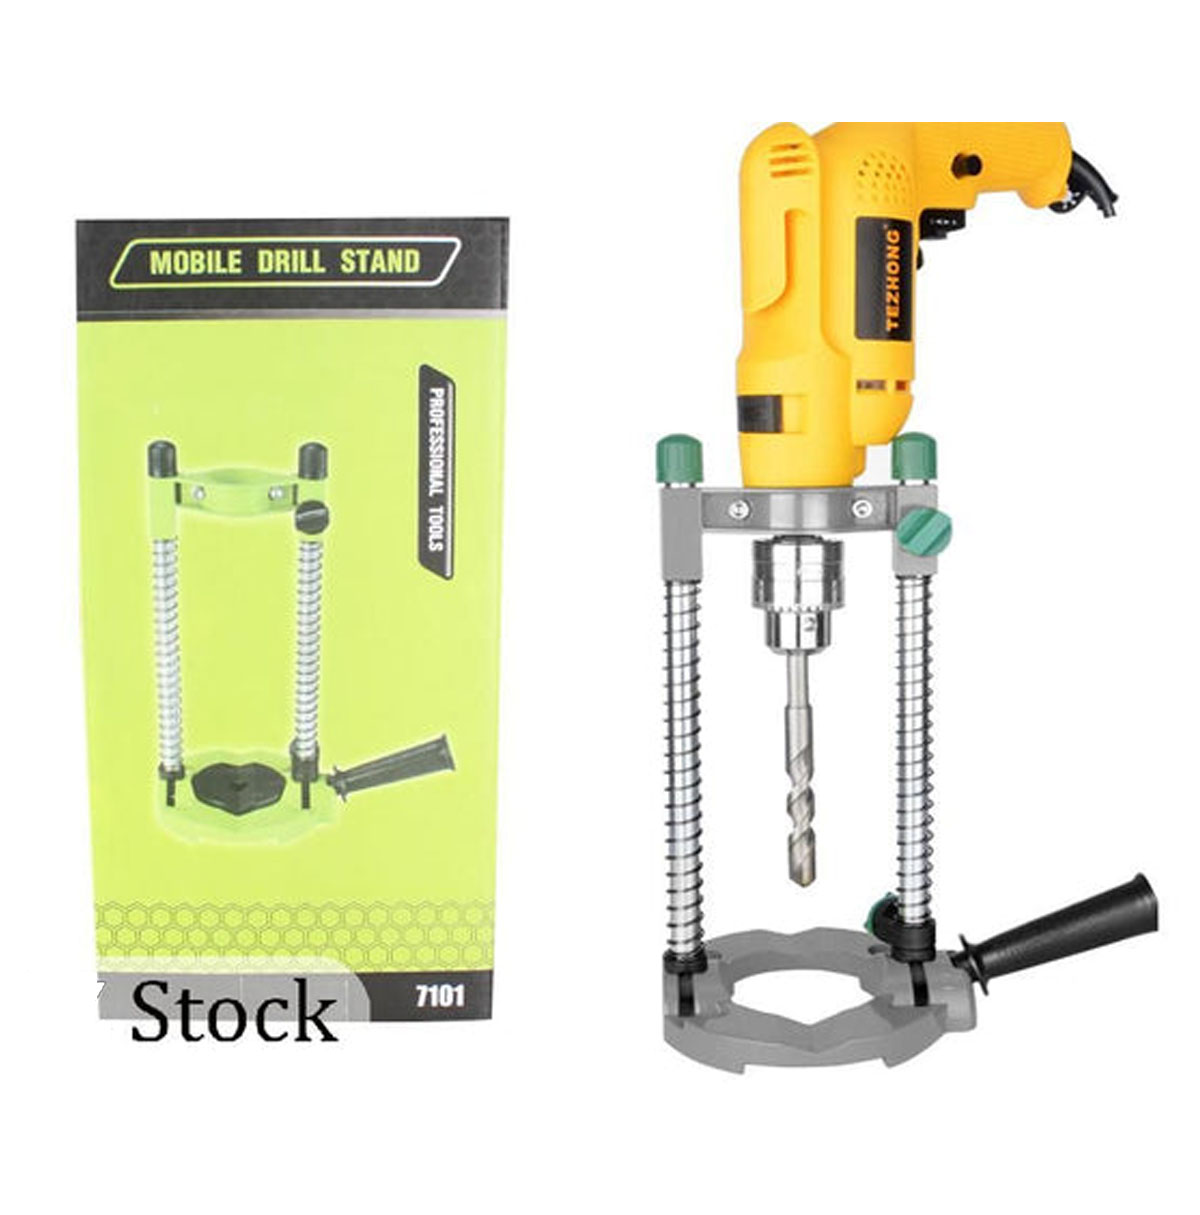 Adjustable Mobile Drill Stand for All Kinds of Drill